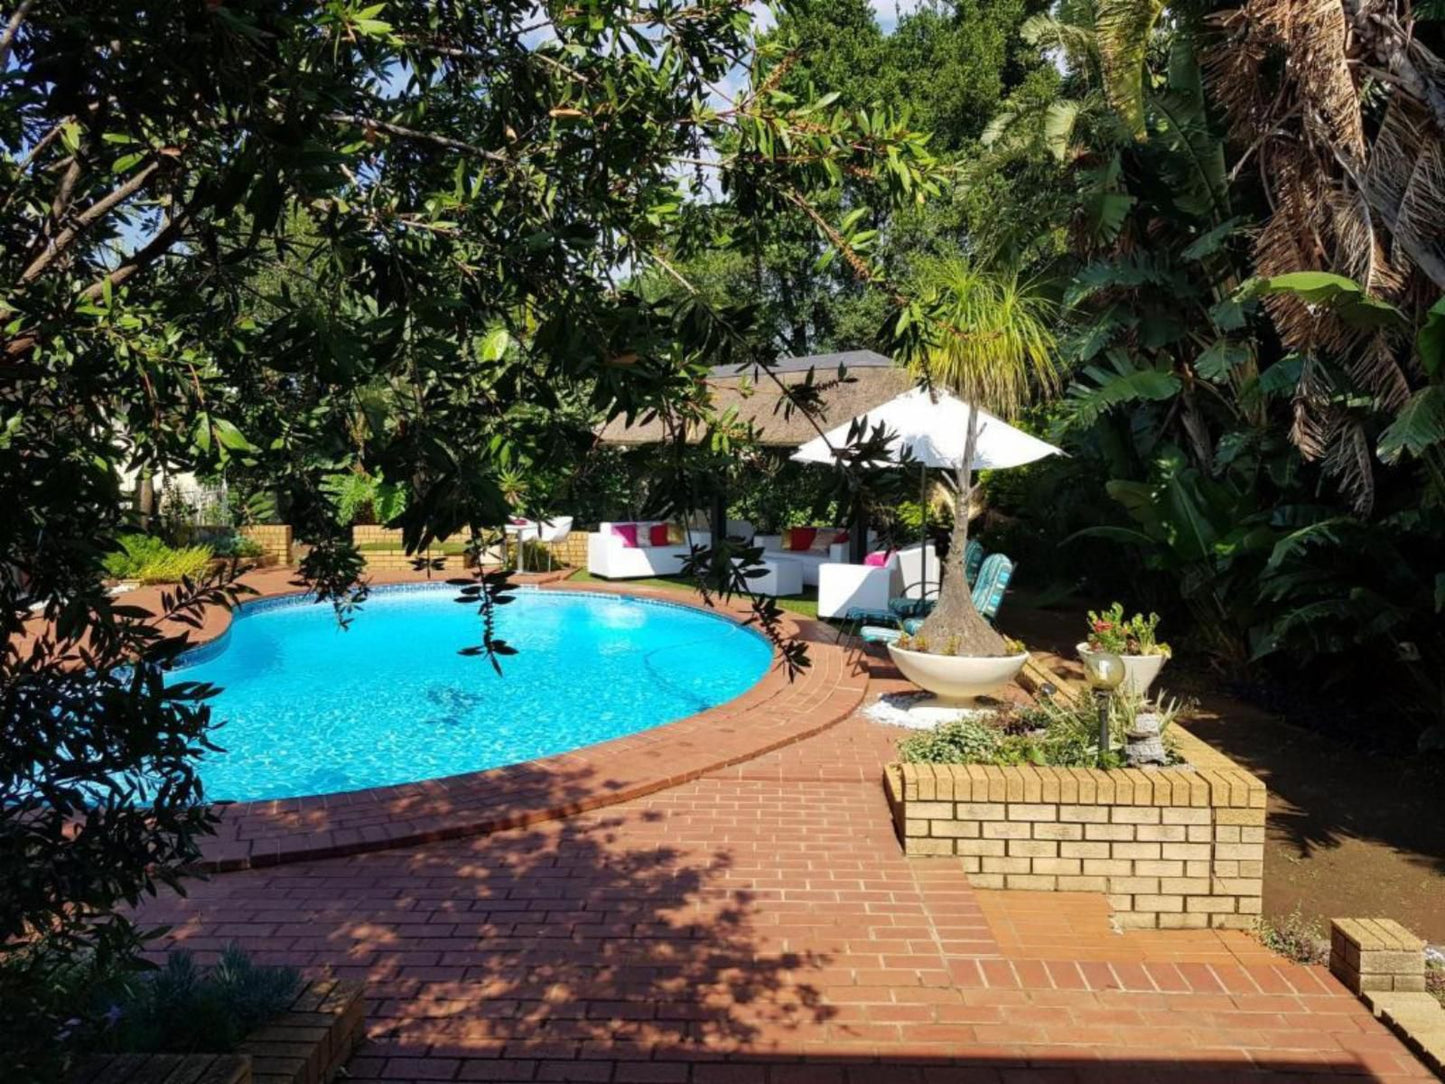 Sollunaa Guesthouse Wendywood Johannesburg Gauteng South Africa Palm Tree, Plant, Nature, Wood, Garden, Swimming Pool